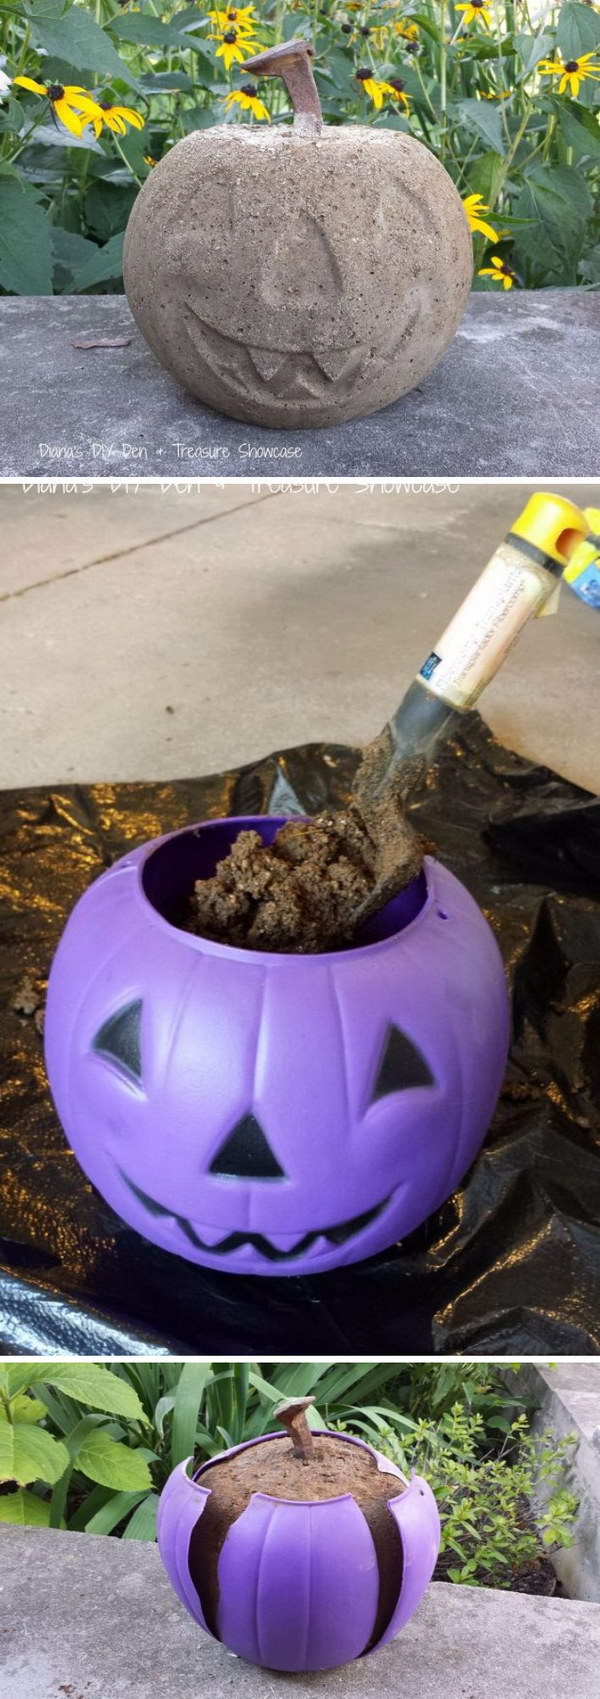 Use A Dollar Store Plastic Pumpkin As A Mold For A Concrete Halloween Ornament. 